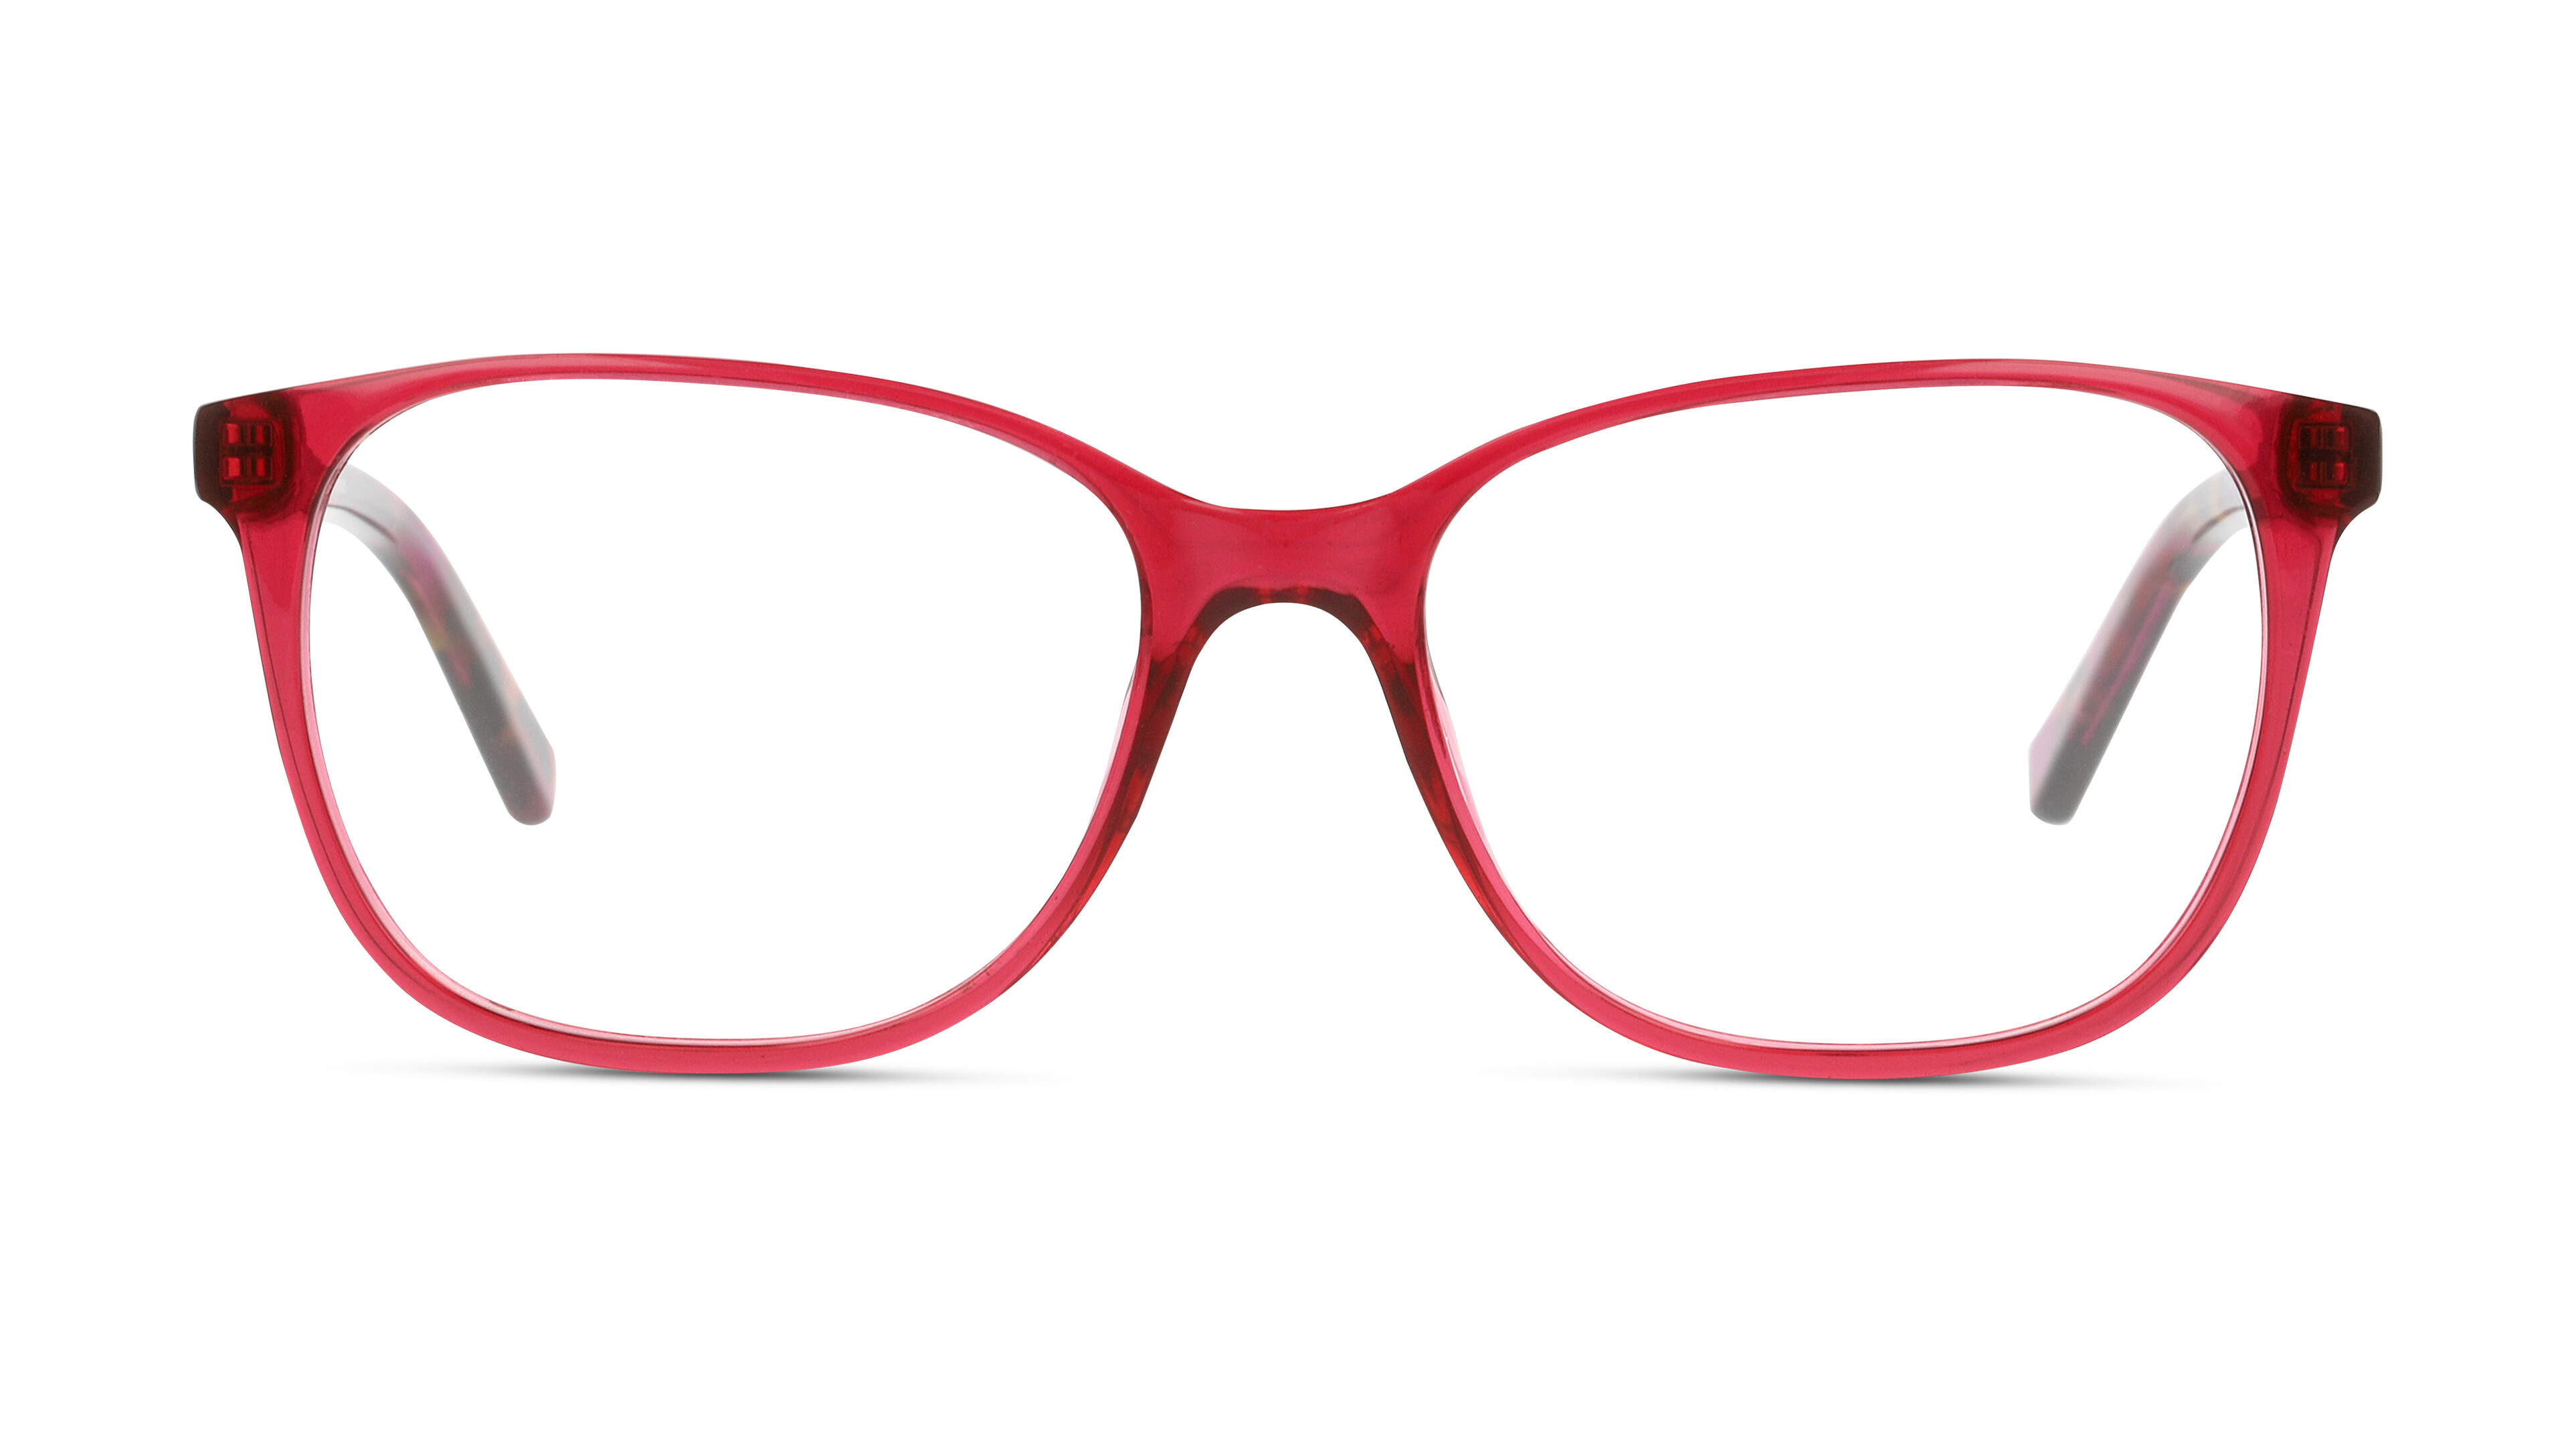 Front UNOFFICIAL UNOF0236 RH00 Brille Rosa